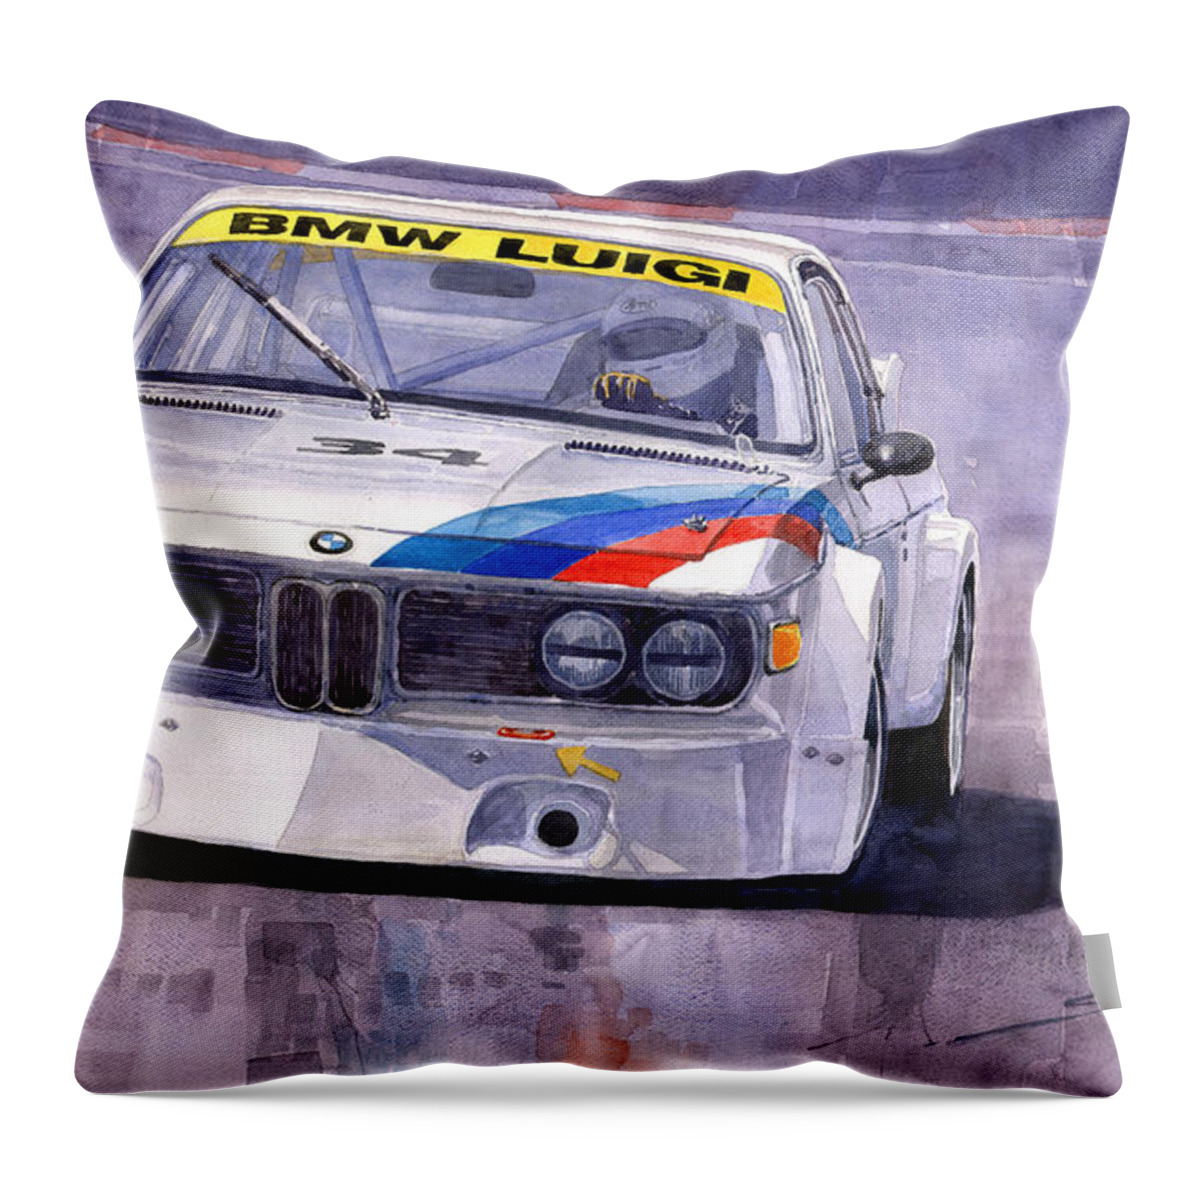 Watercolor Throw Pillow featuring the painting Bmw 3 0 Csl 1972 1975 by Yuriy Shevchuk